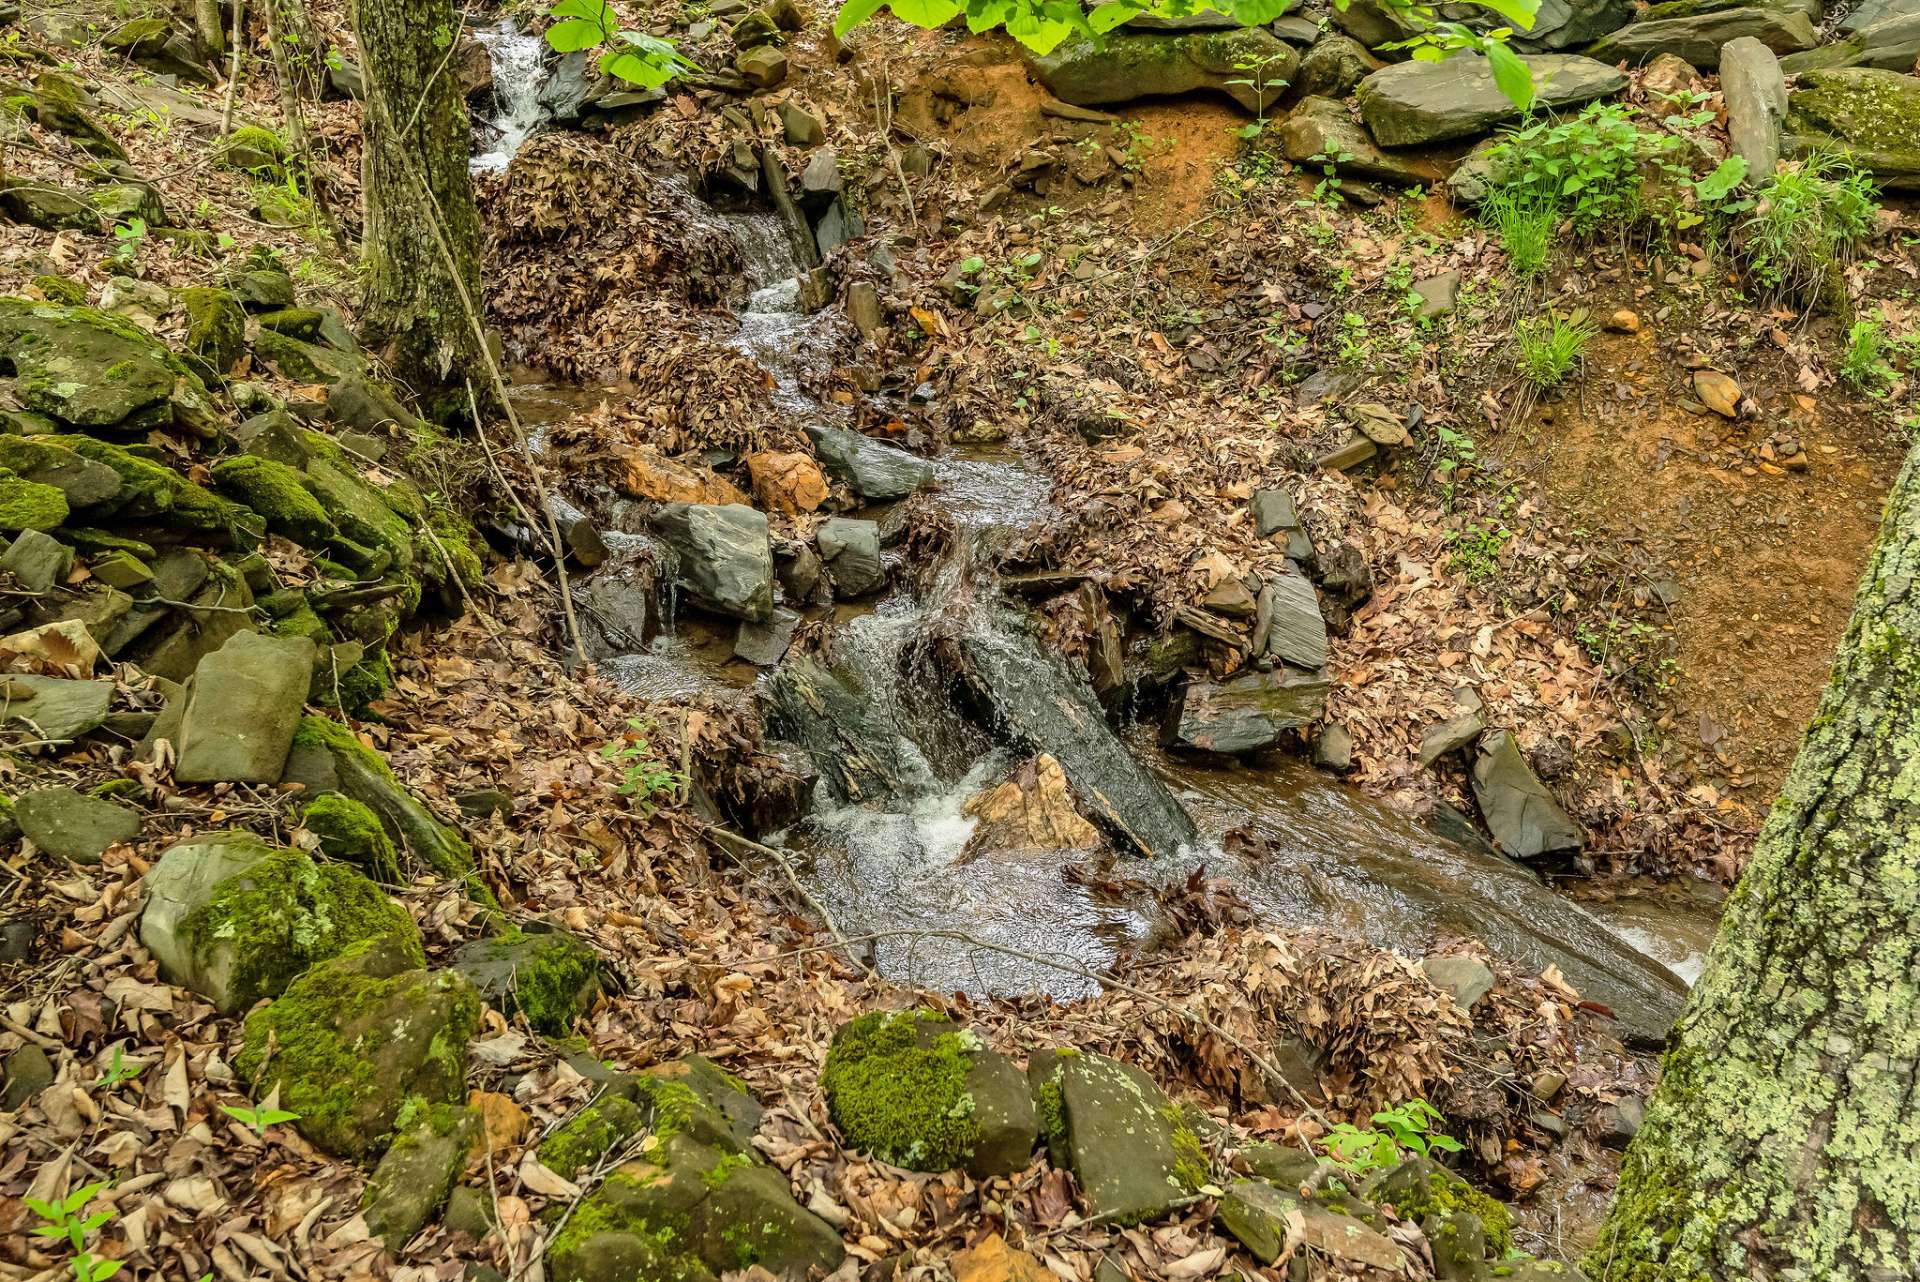 This mountain stream is directly behind the cabin and features multiple waterfalls, creating a melody of cascading water that soothes the soul.